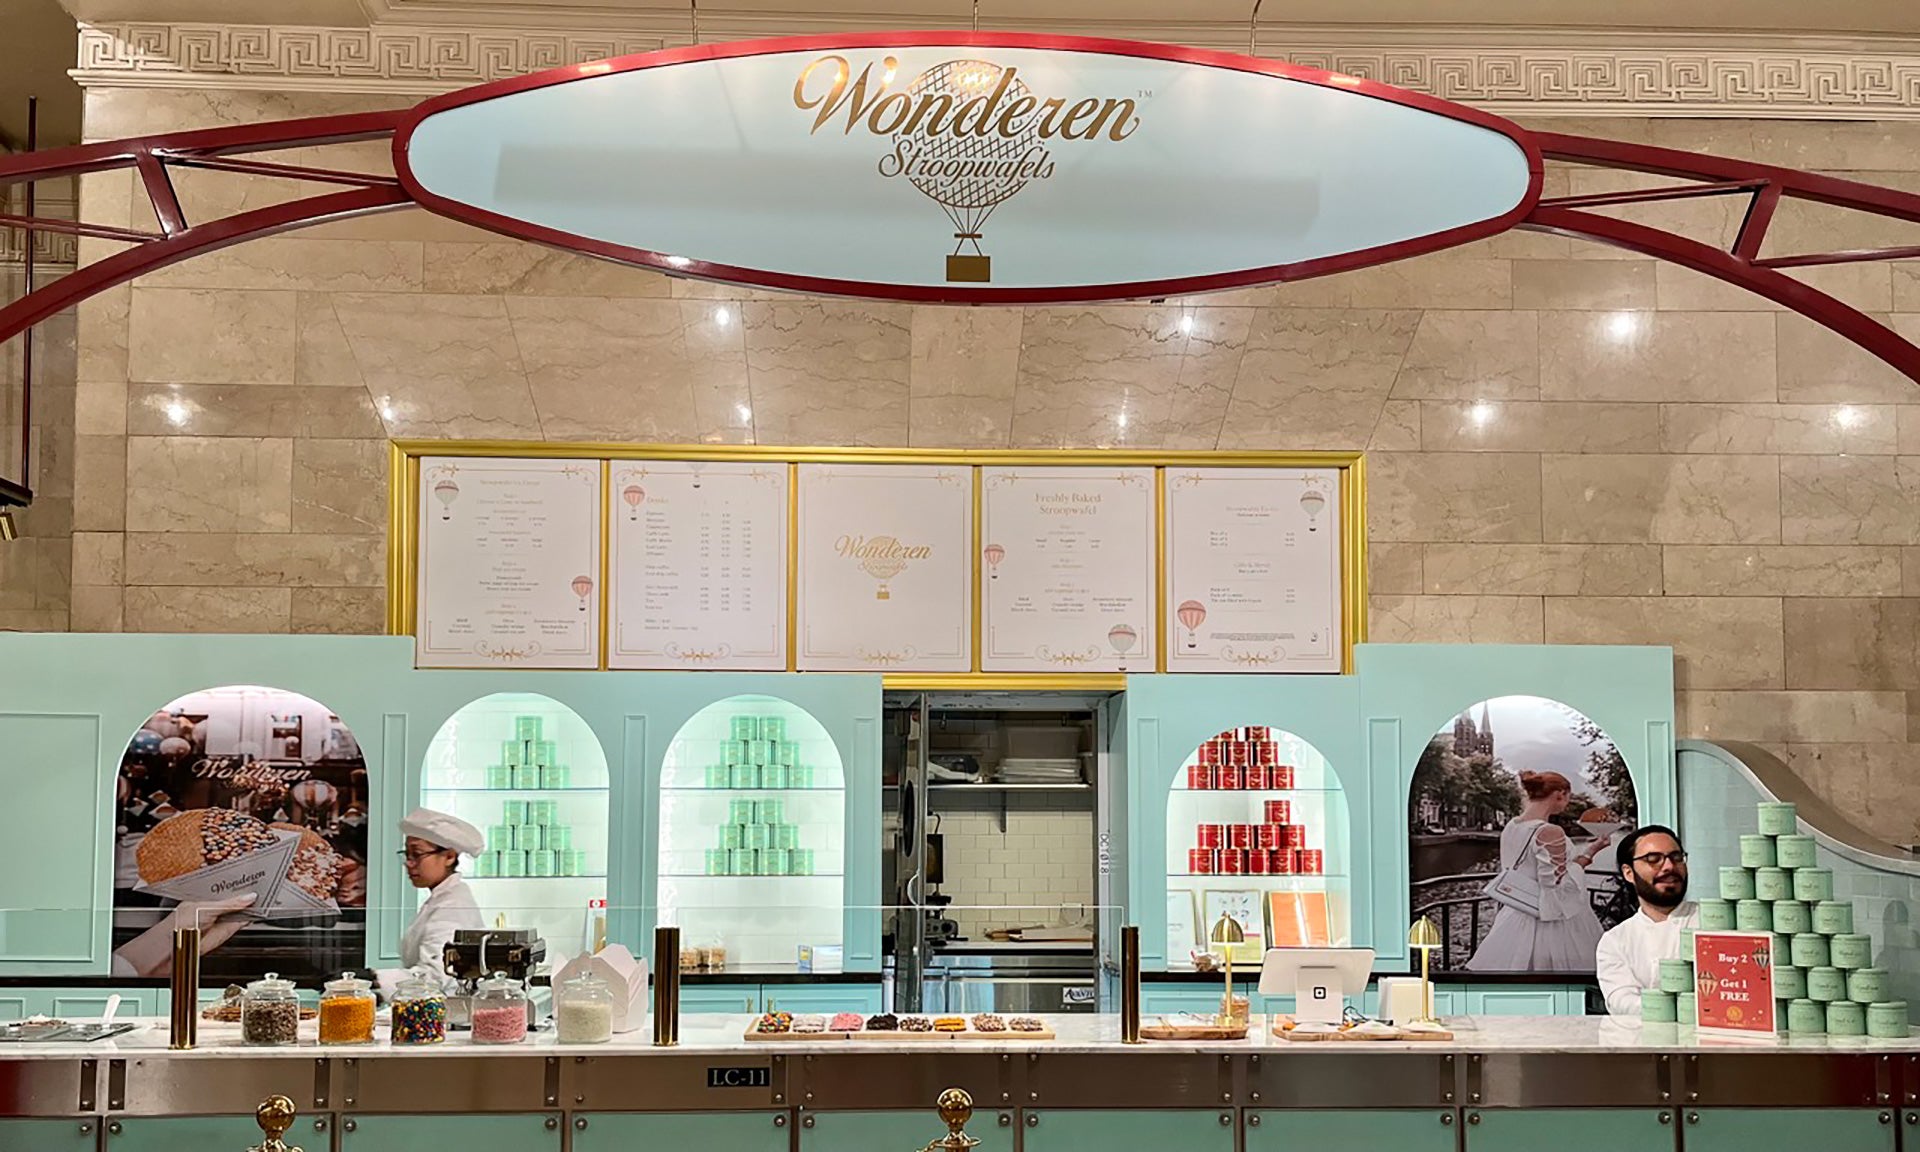 Interior view of the Wonderen Stroopwafels store with an elegant marble backdrop and a pastel blue counter. Large menu boards hang above showcasing the freshly baked stroopwafel options. Two employees are present, one wearing a chef's hat busy with food preparation and the other smiling at the camera. Stacks of stroopwafel boxes in varying colors are neatly arranged on the counter, with a display of loose wafels and toppings in front. The store emanates a welcoming and luxurious atmosphere.